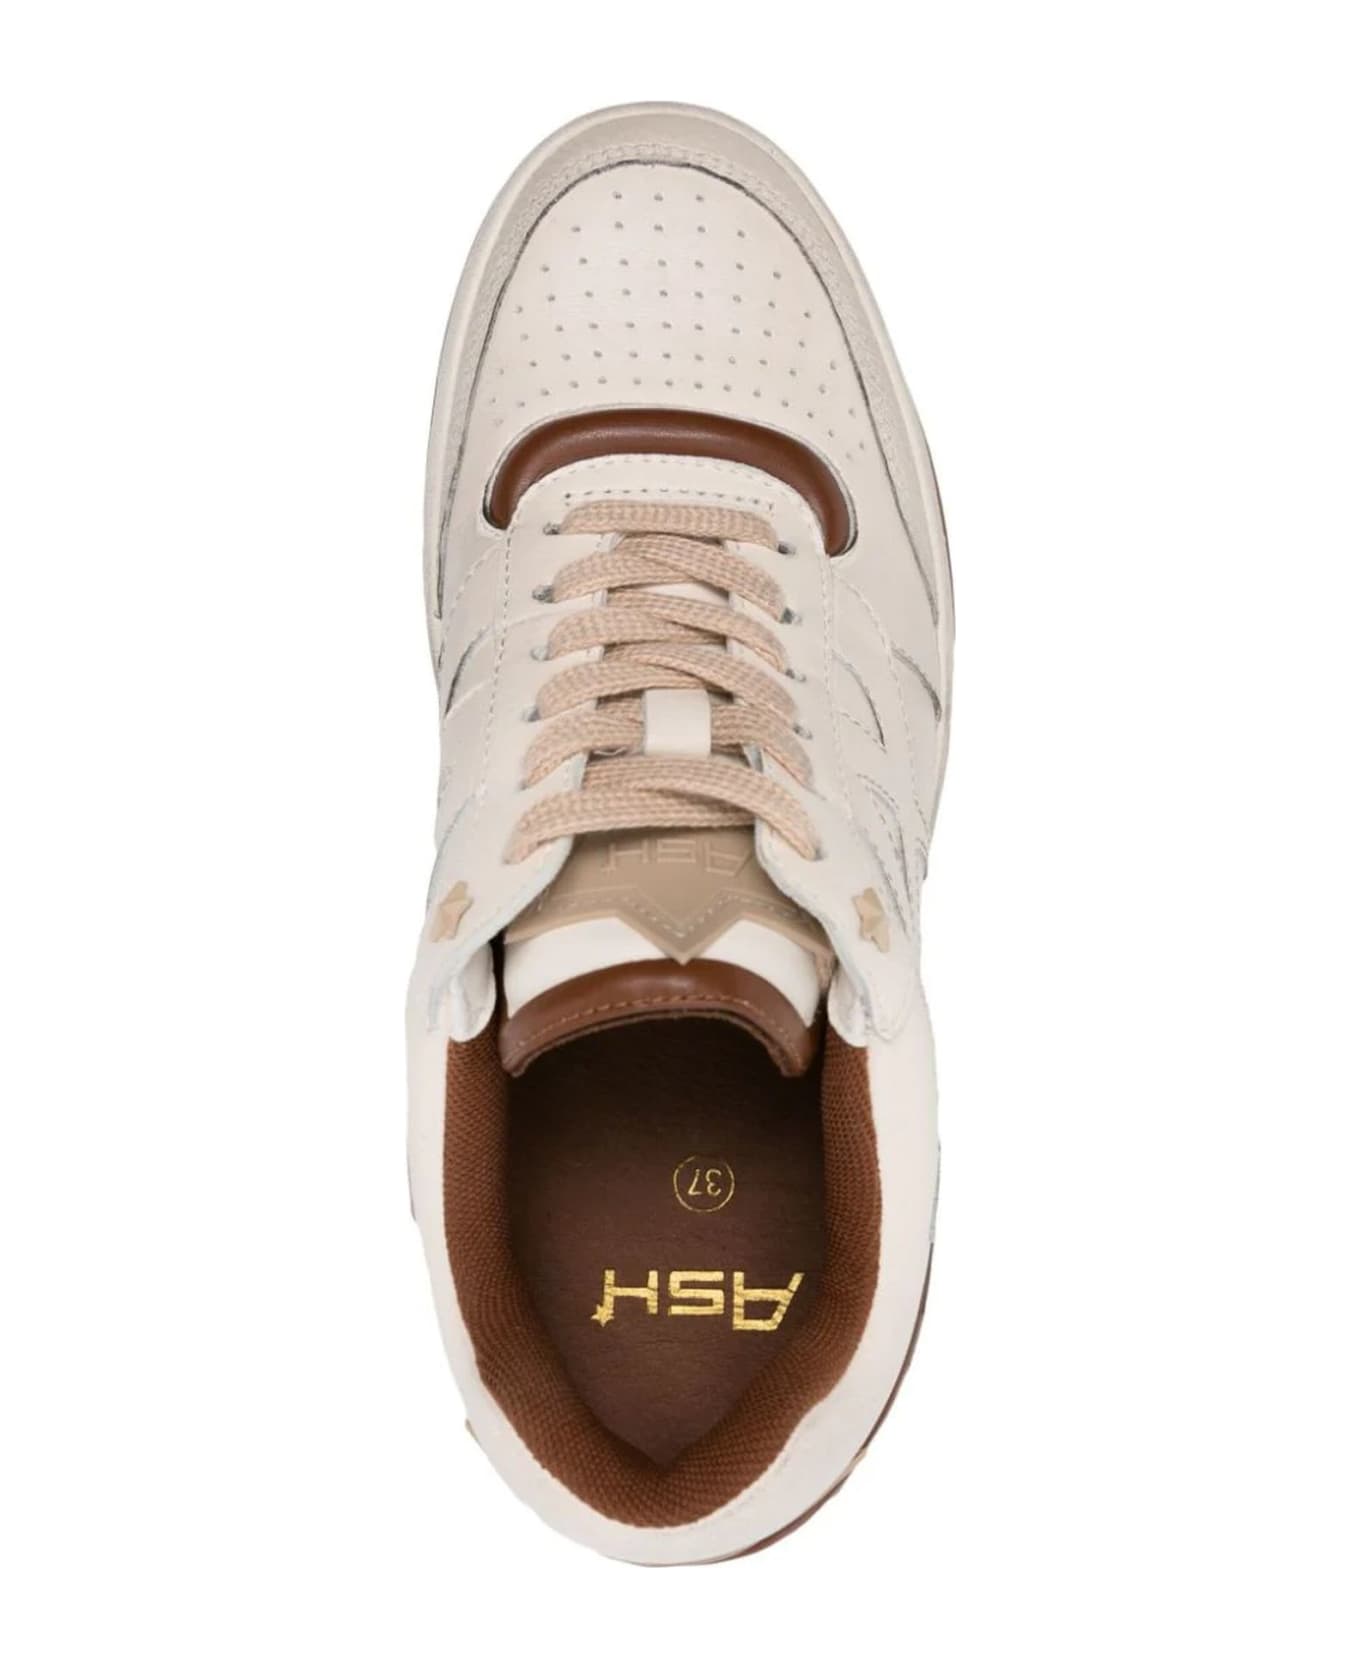 Ash White And Beige Calf Leather Sneakers - White